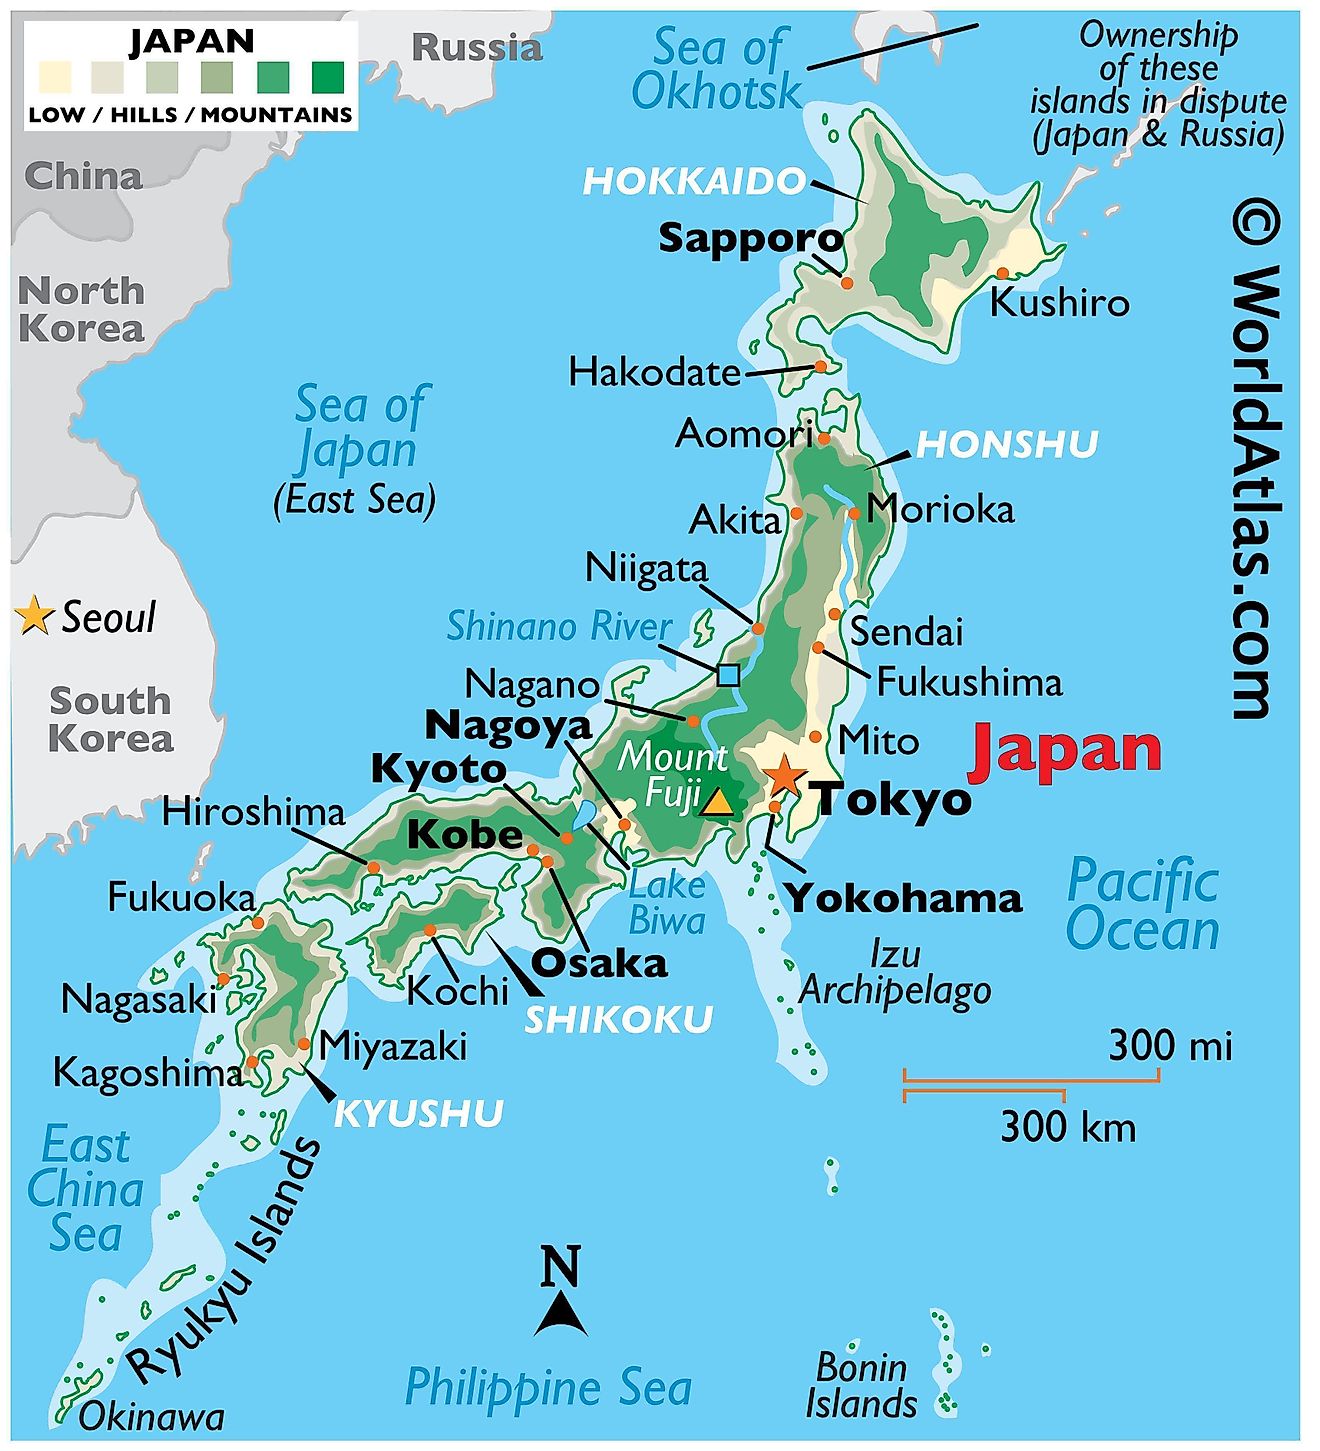 Physical Map of Japan showing the four main islands, surrounding seas, relief, Mt. Fuji, major rivers, important cities, etc.